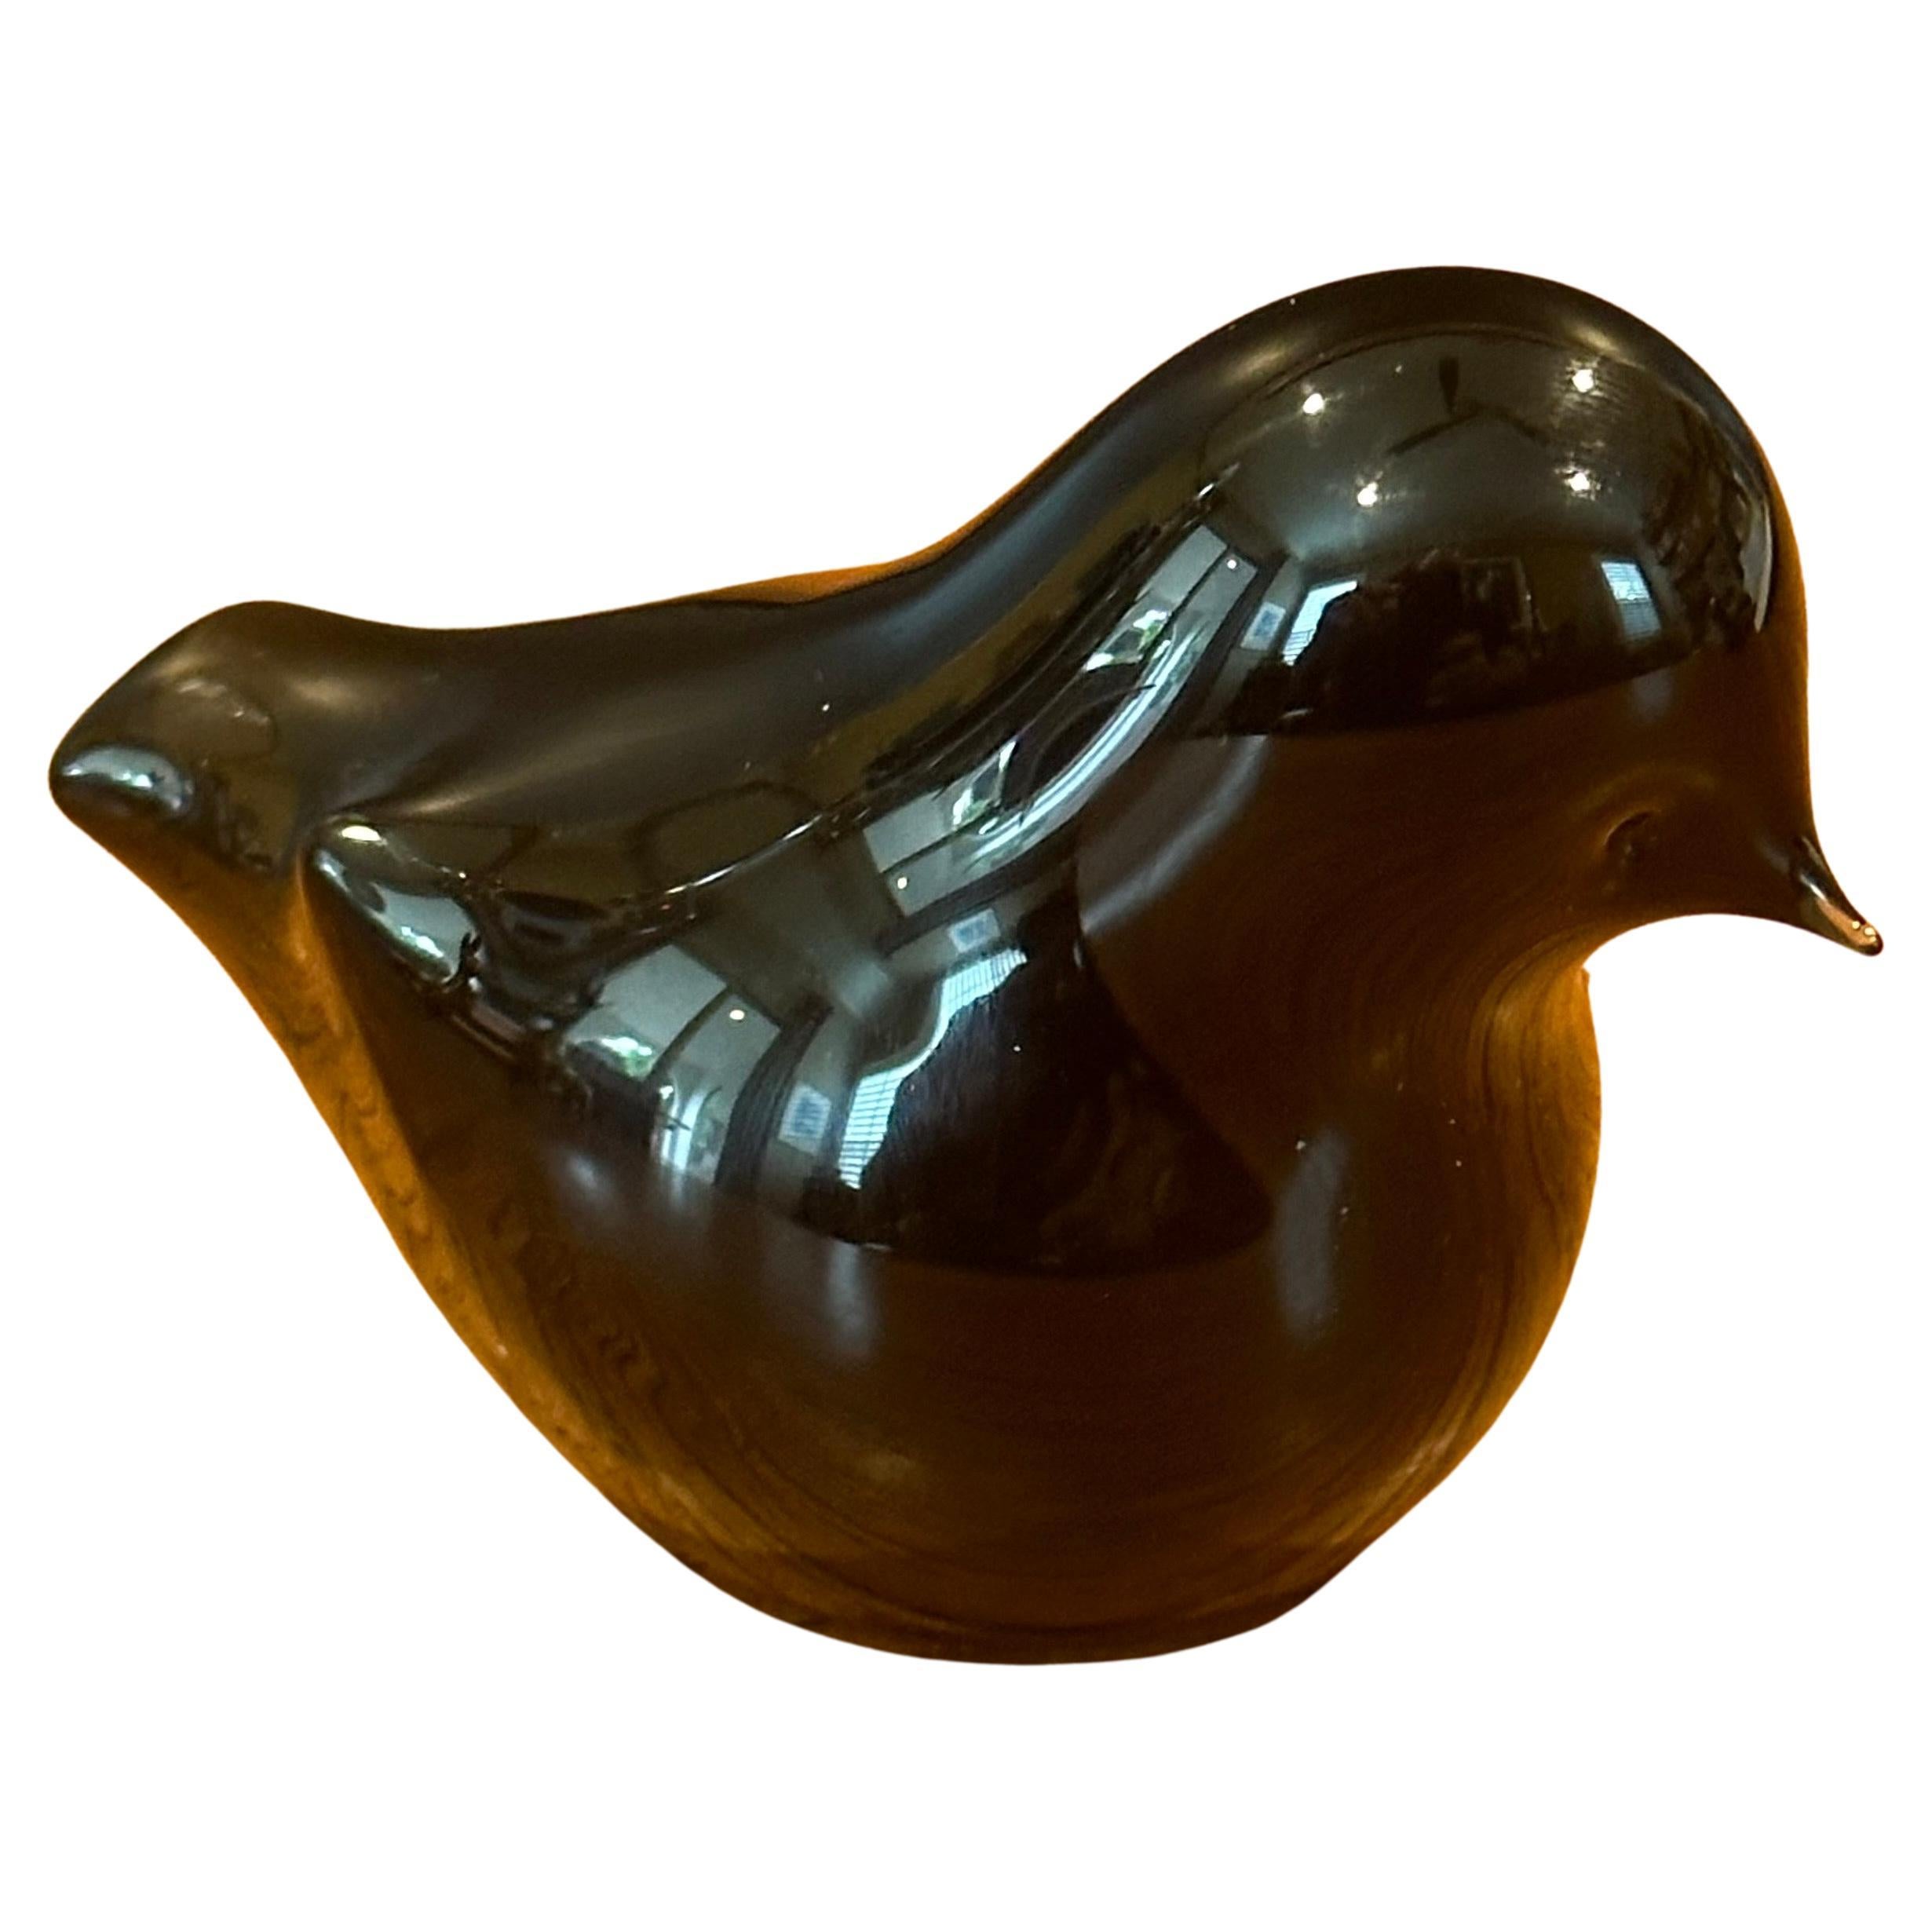 Small Art Glass Bird Paperweight / Sculpture by Nuutajarvi of Finland For Sale